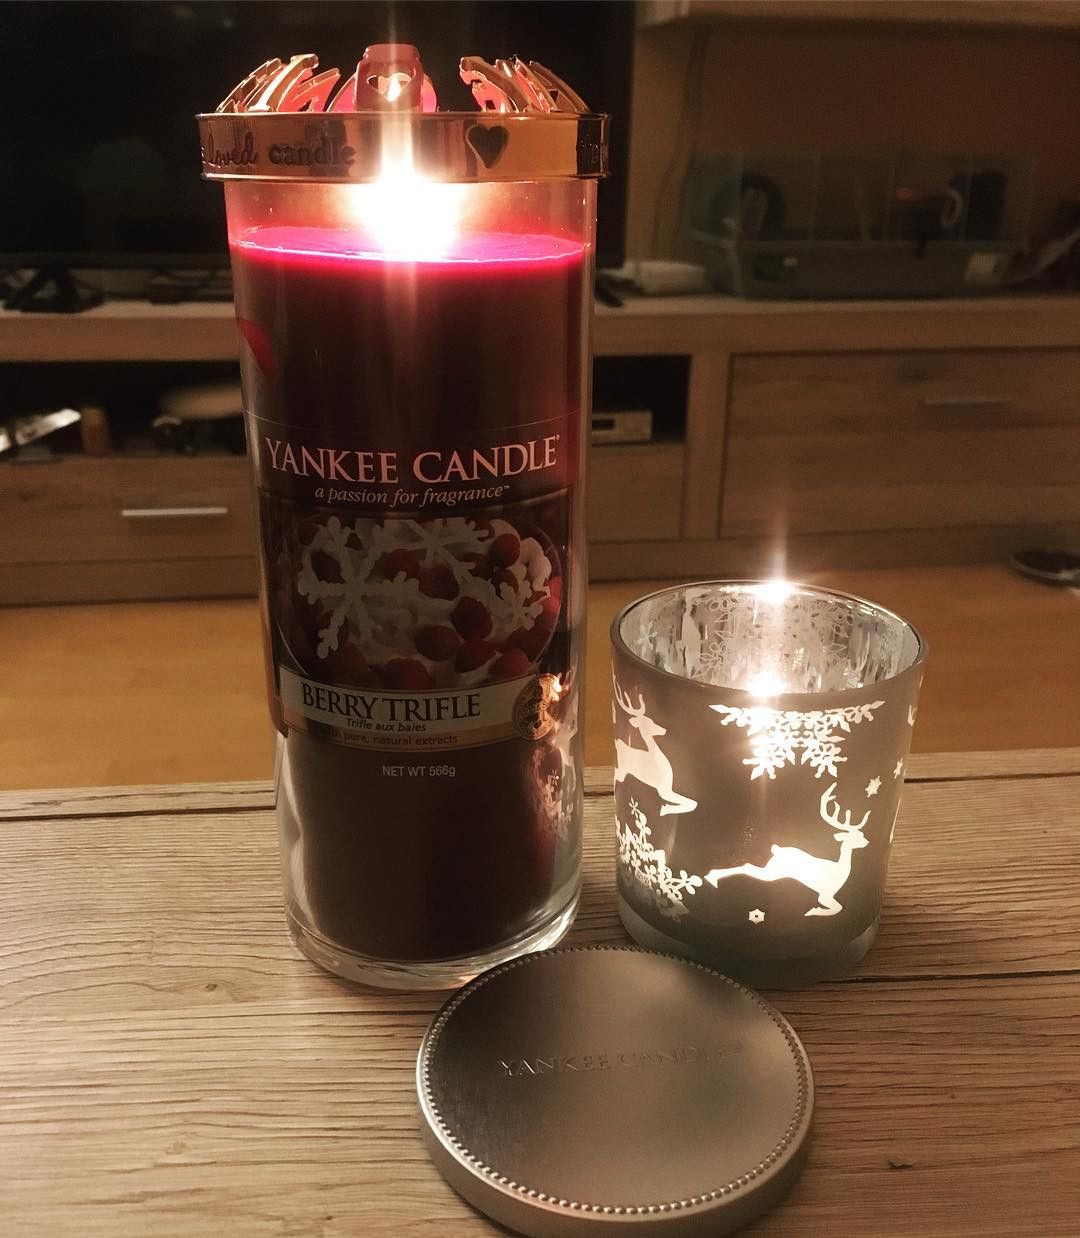 yankee candle hurricane vase of yankeecandledecor hash tags deskgram intended for chill with berry trifle a¤ a berrytrifle yankeecandledecor decor yankeecandles